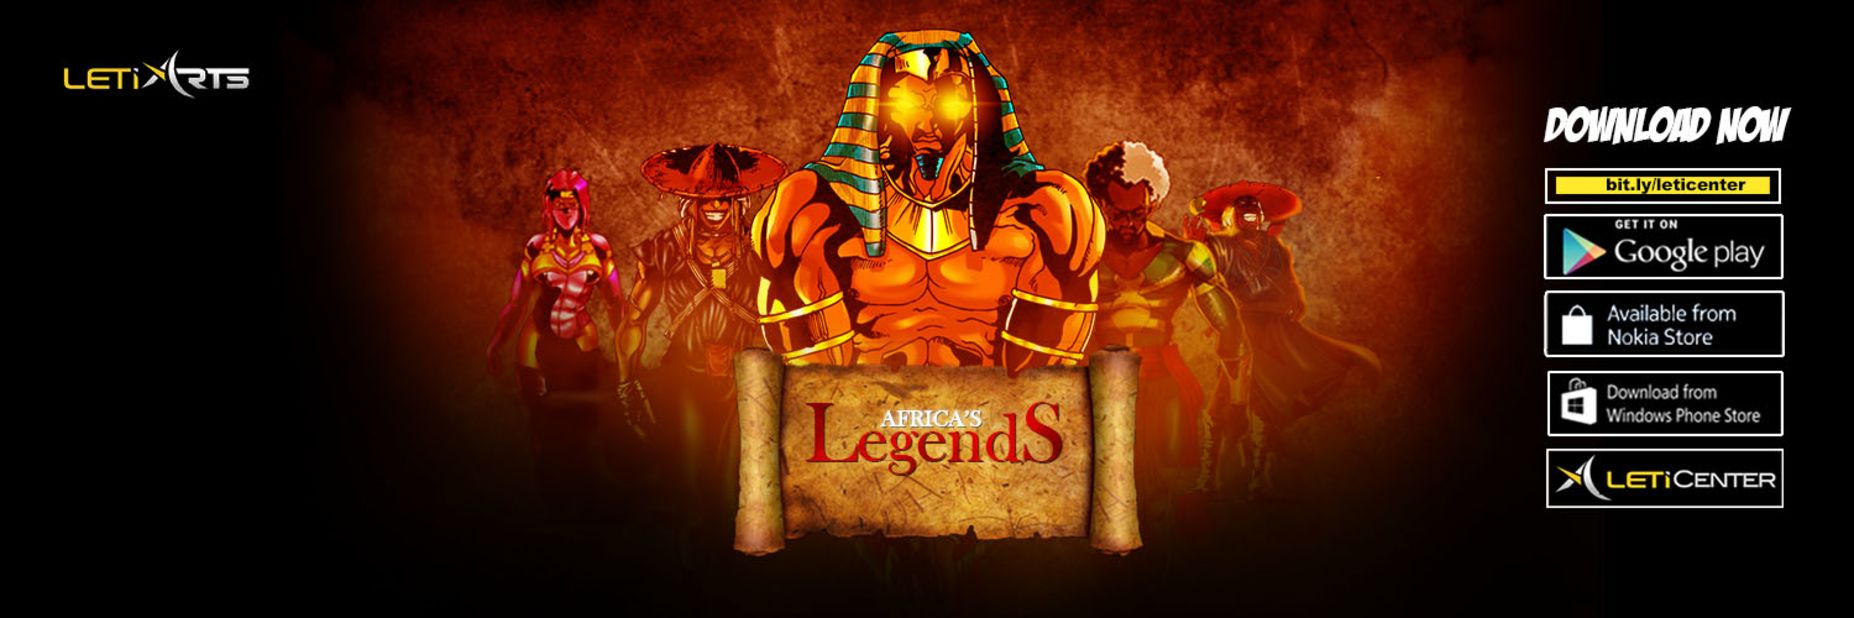 Elite superheroes fight crime in present day Africa in mobile game Africa's Legends. Some of the characters are re imagined from African folklore, while others are fictional. 